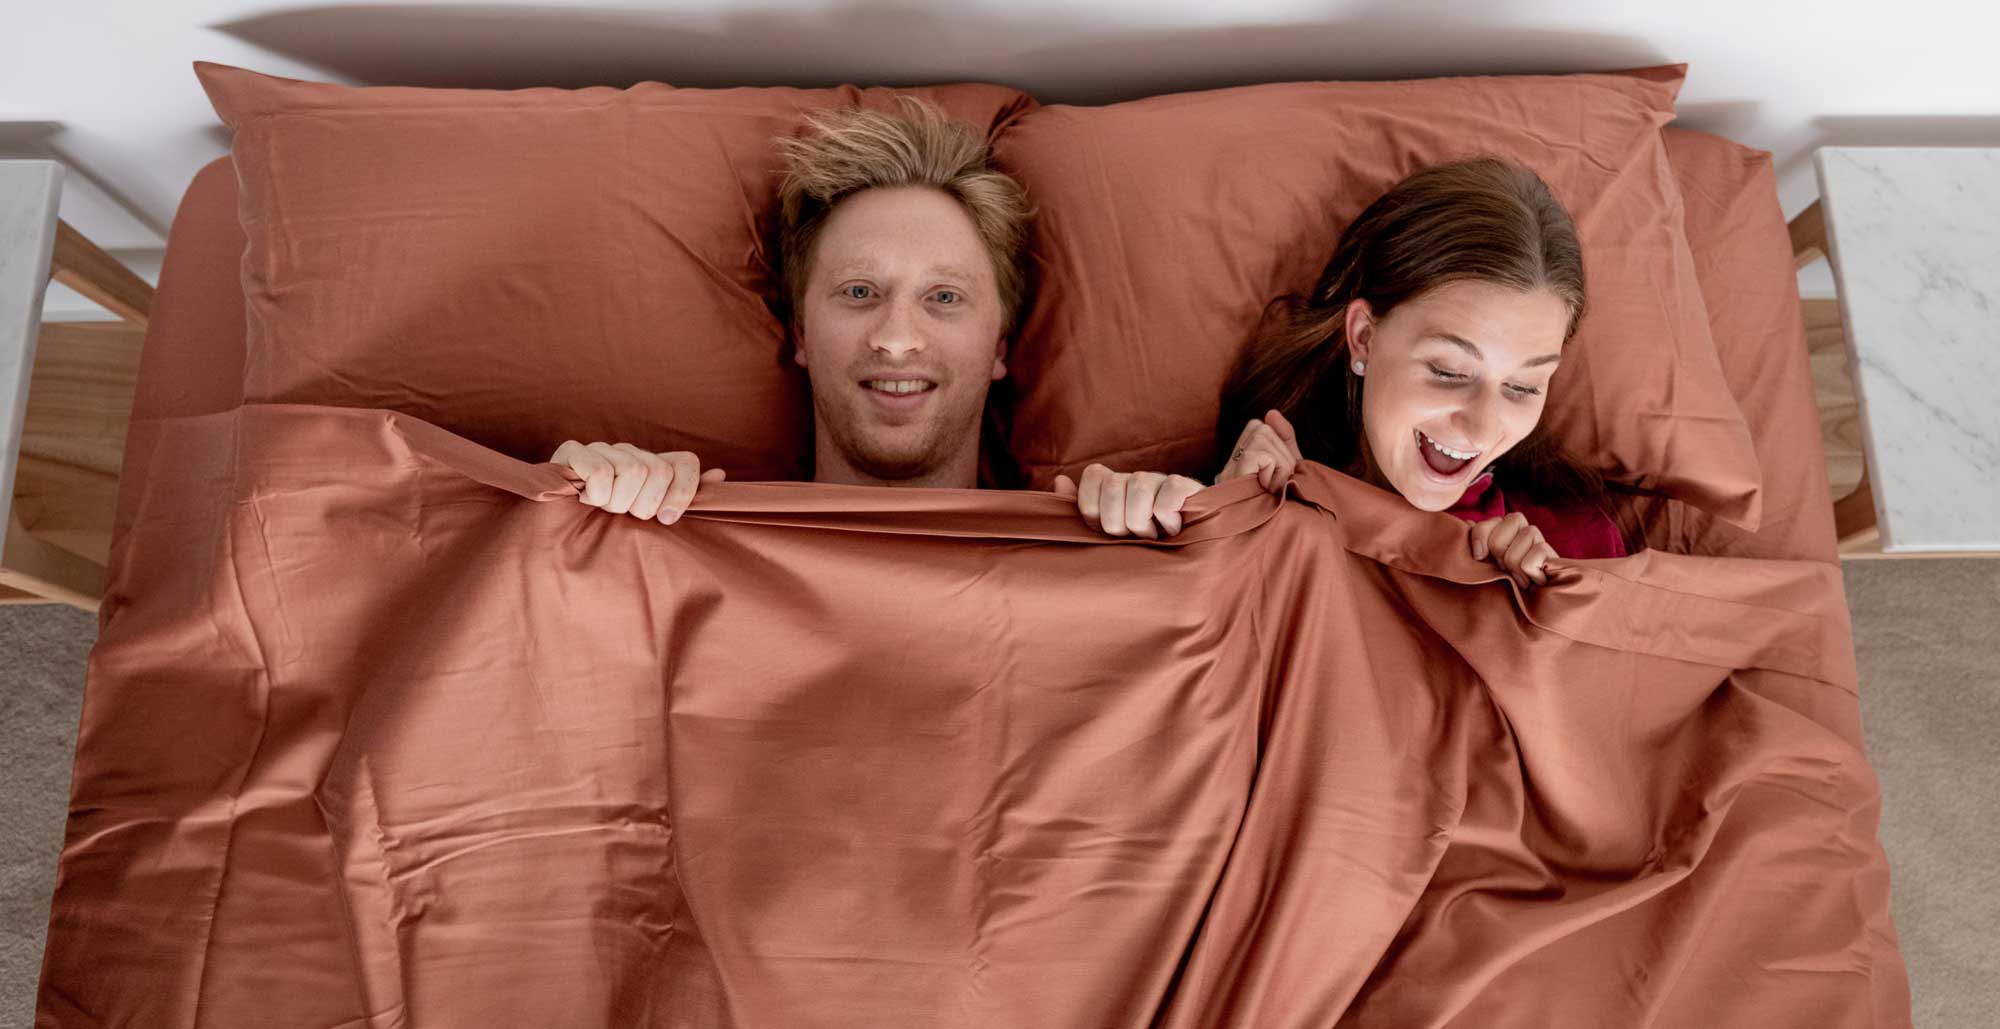 7 Weird & Wonderful Things Going on Inside Aussie Bedrooms.